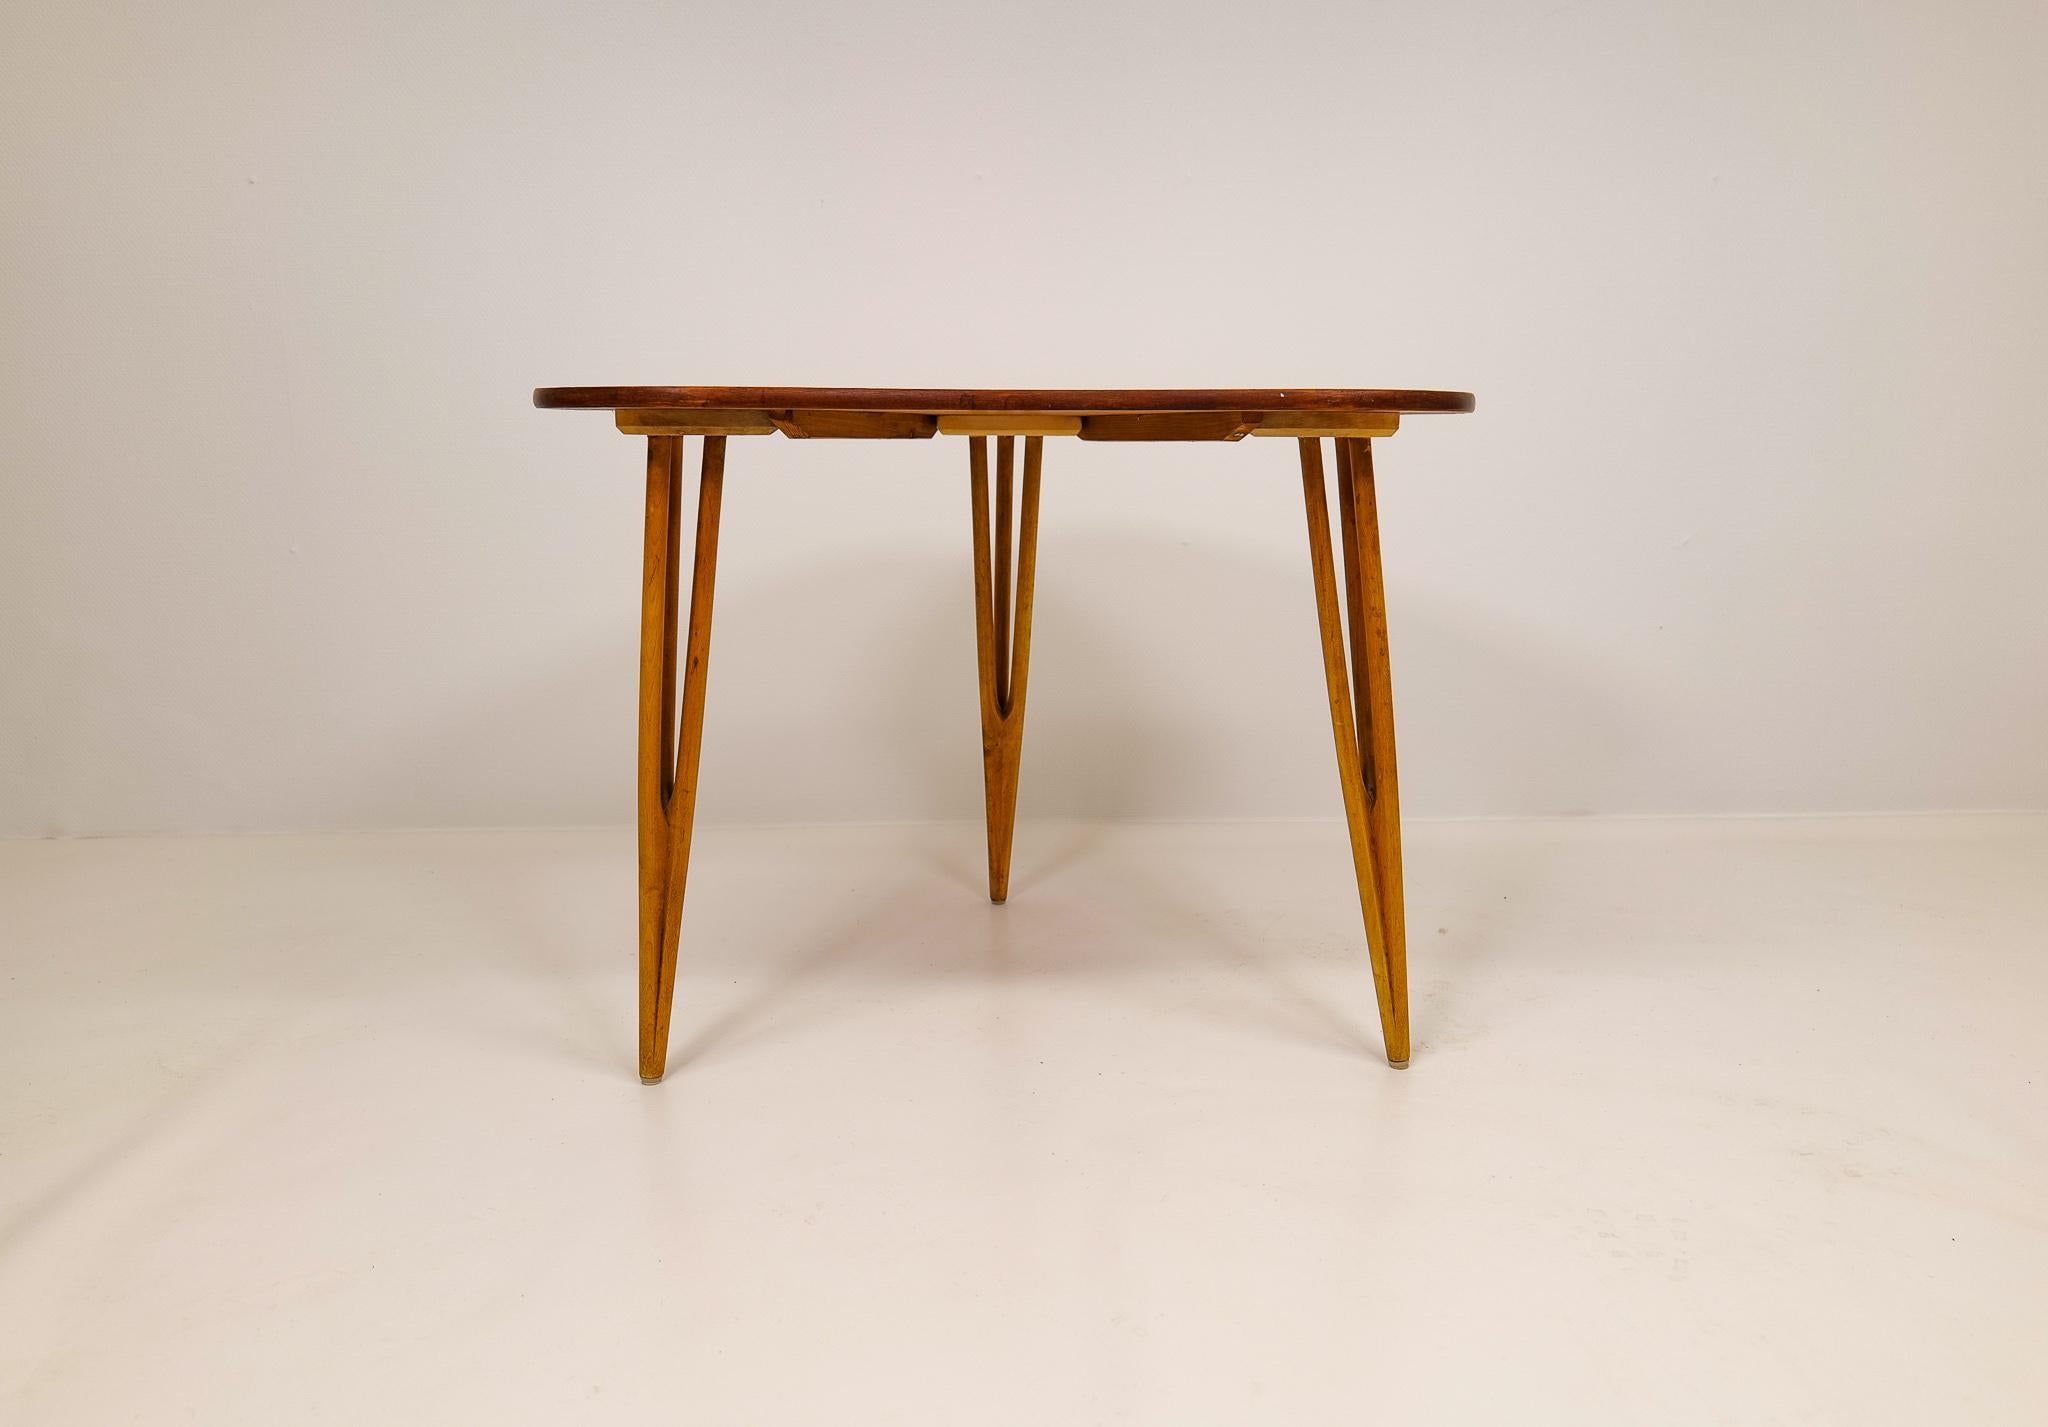 Pine Swedish Modern Unique Coffee Table by Bo Fjaestad, Sweden, 1950s For Sale